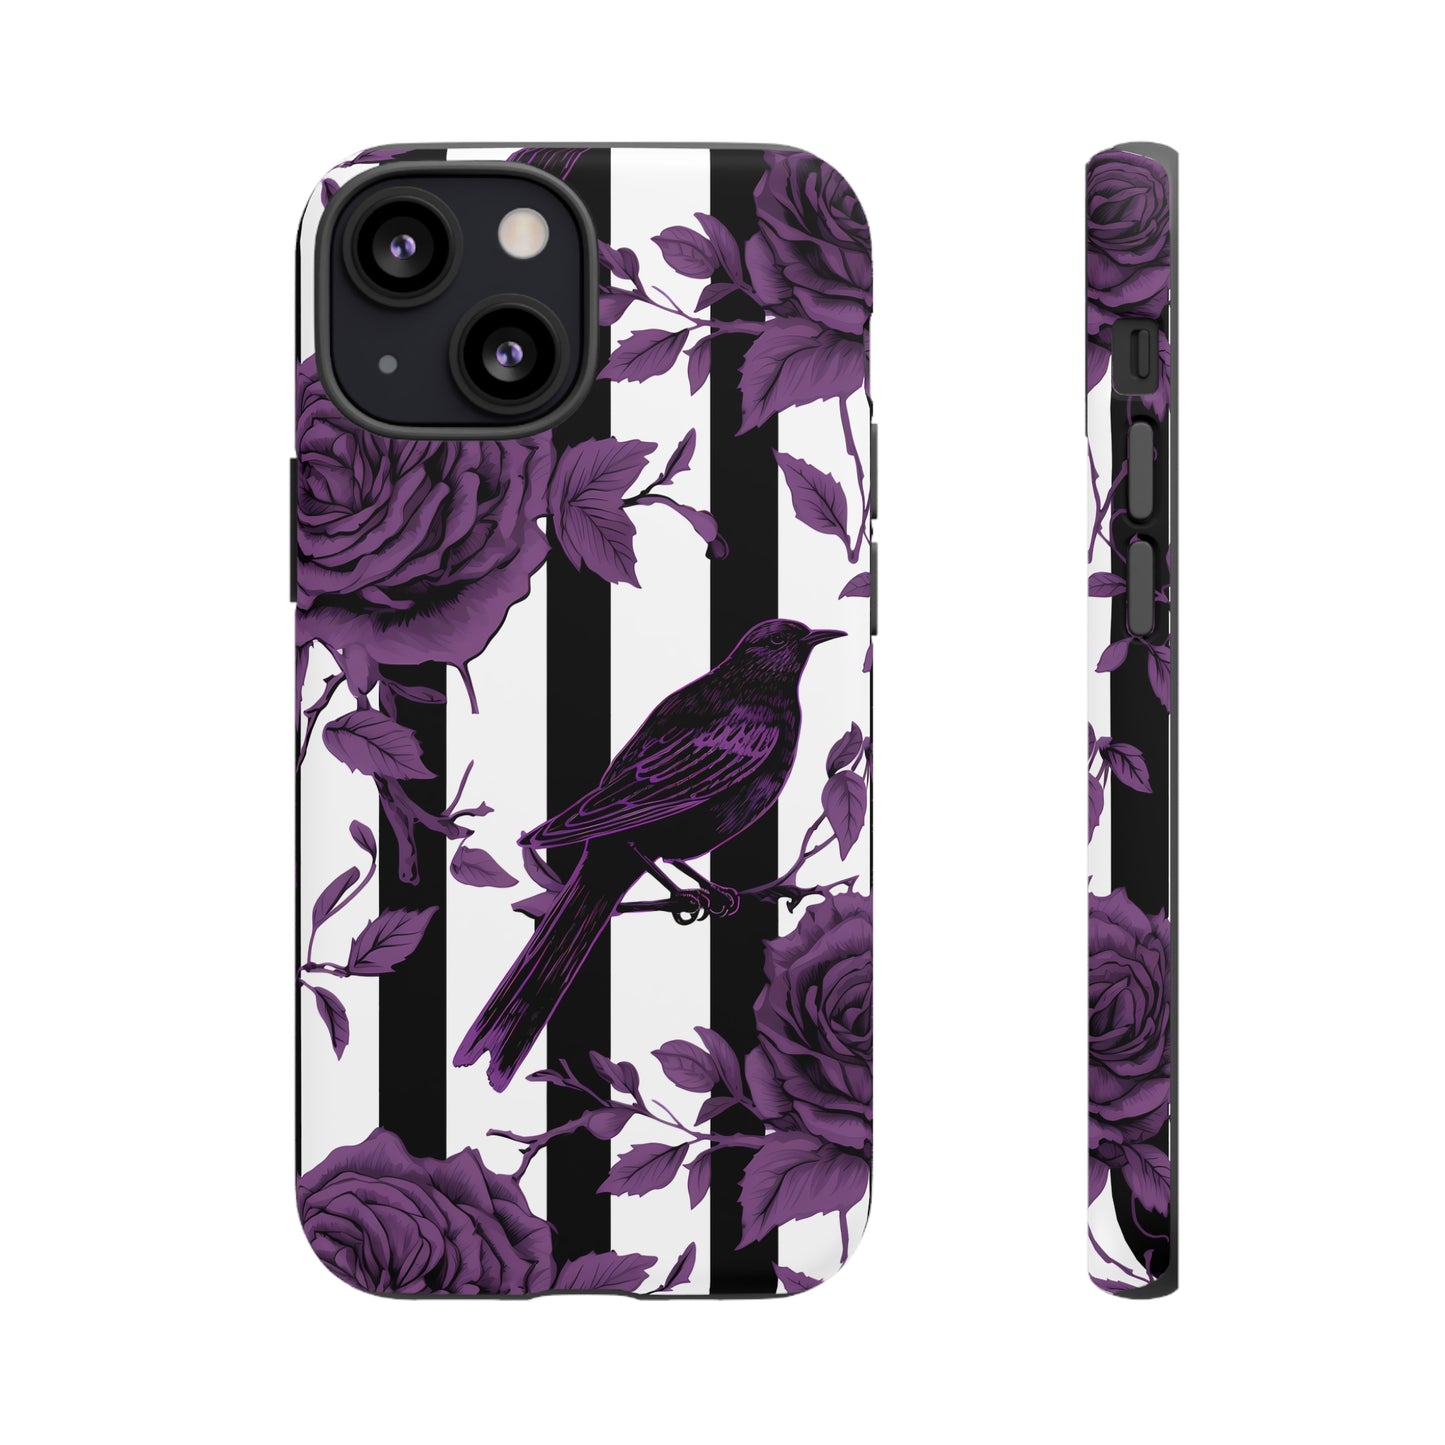 Striped Crows and Roses Tough Cases for iPhone Samsung Google PhonesPhone CaseVTZdesignsiPhone 13 MiniMatteAccessoriescrowsGlossy